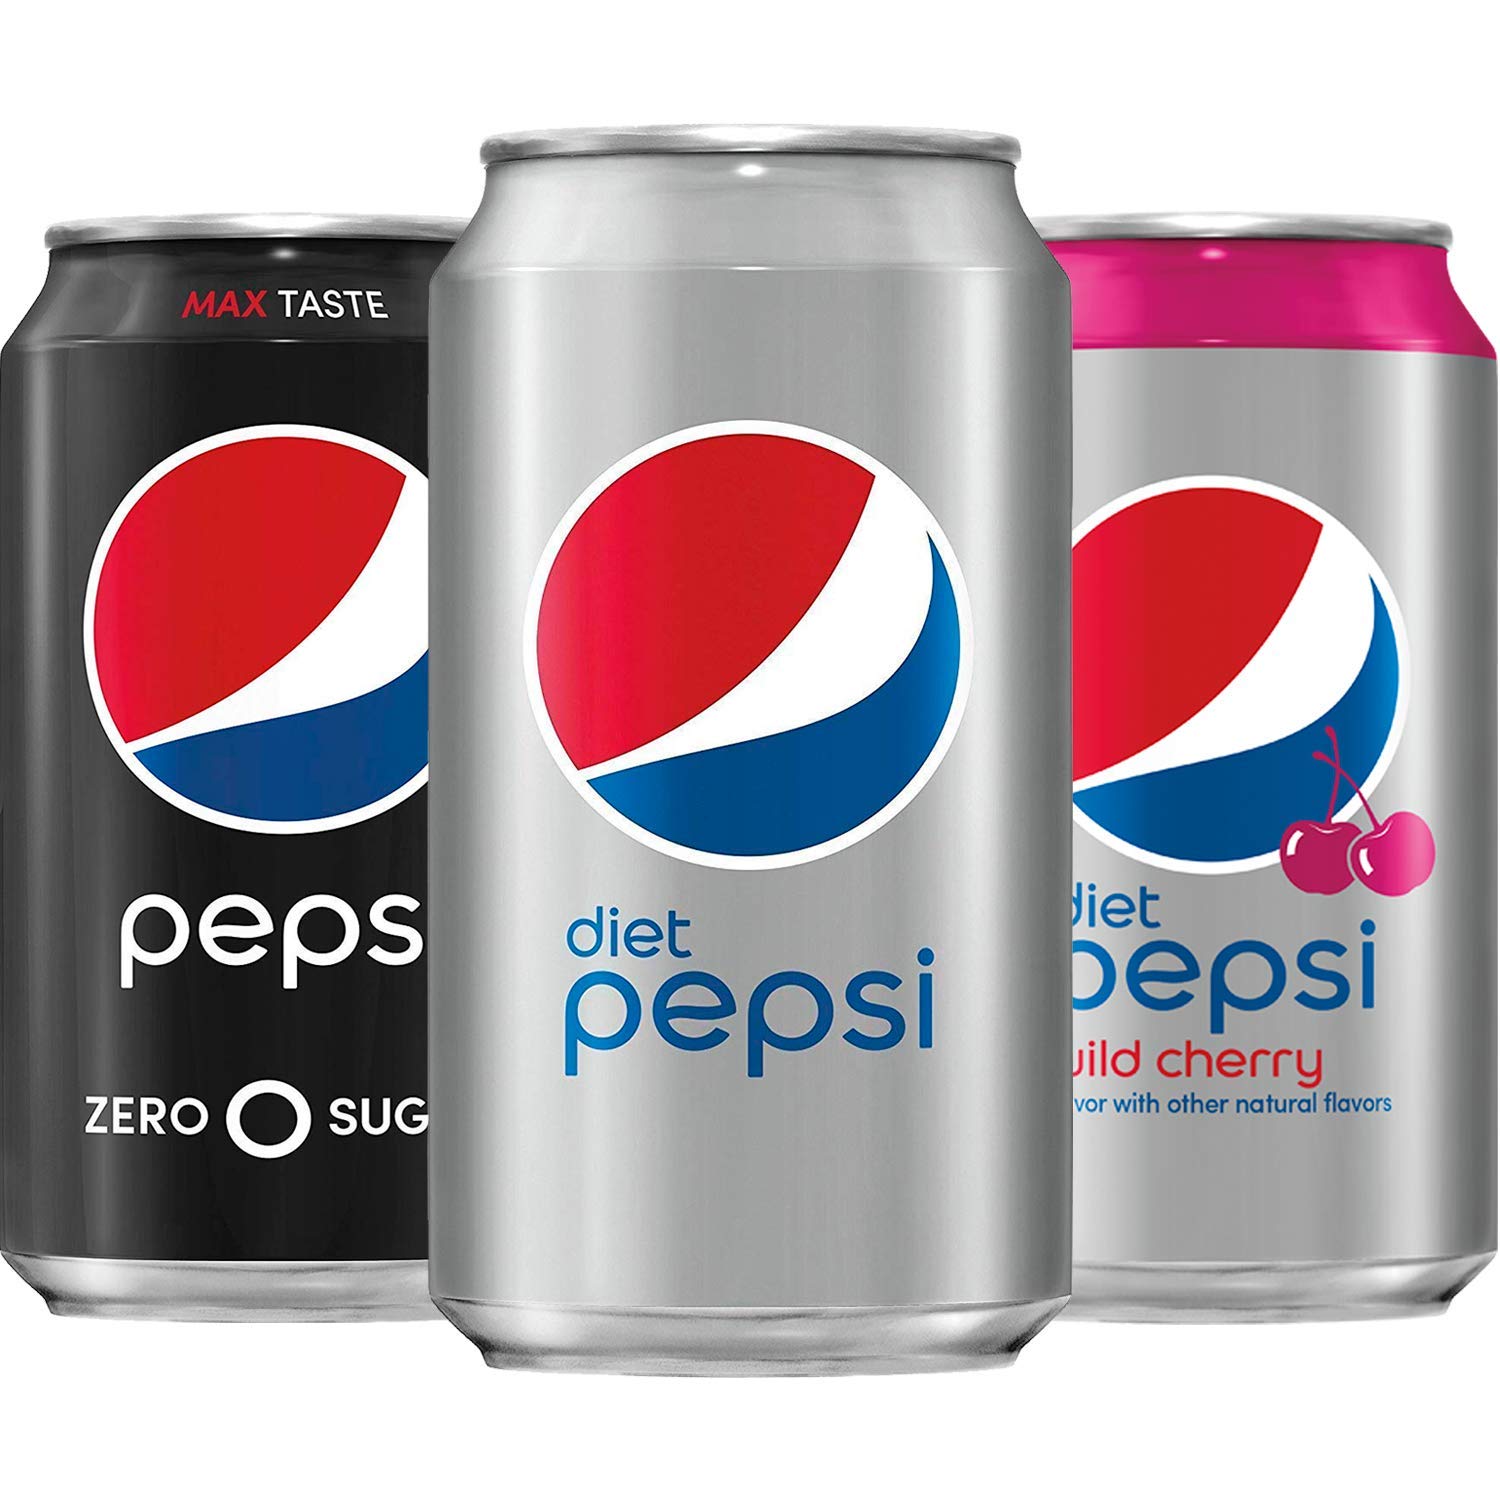 20-refreshing-facts-about-diet-pepsi